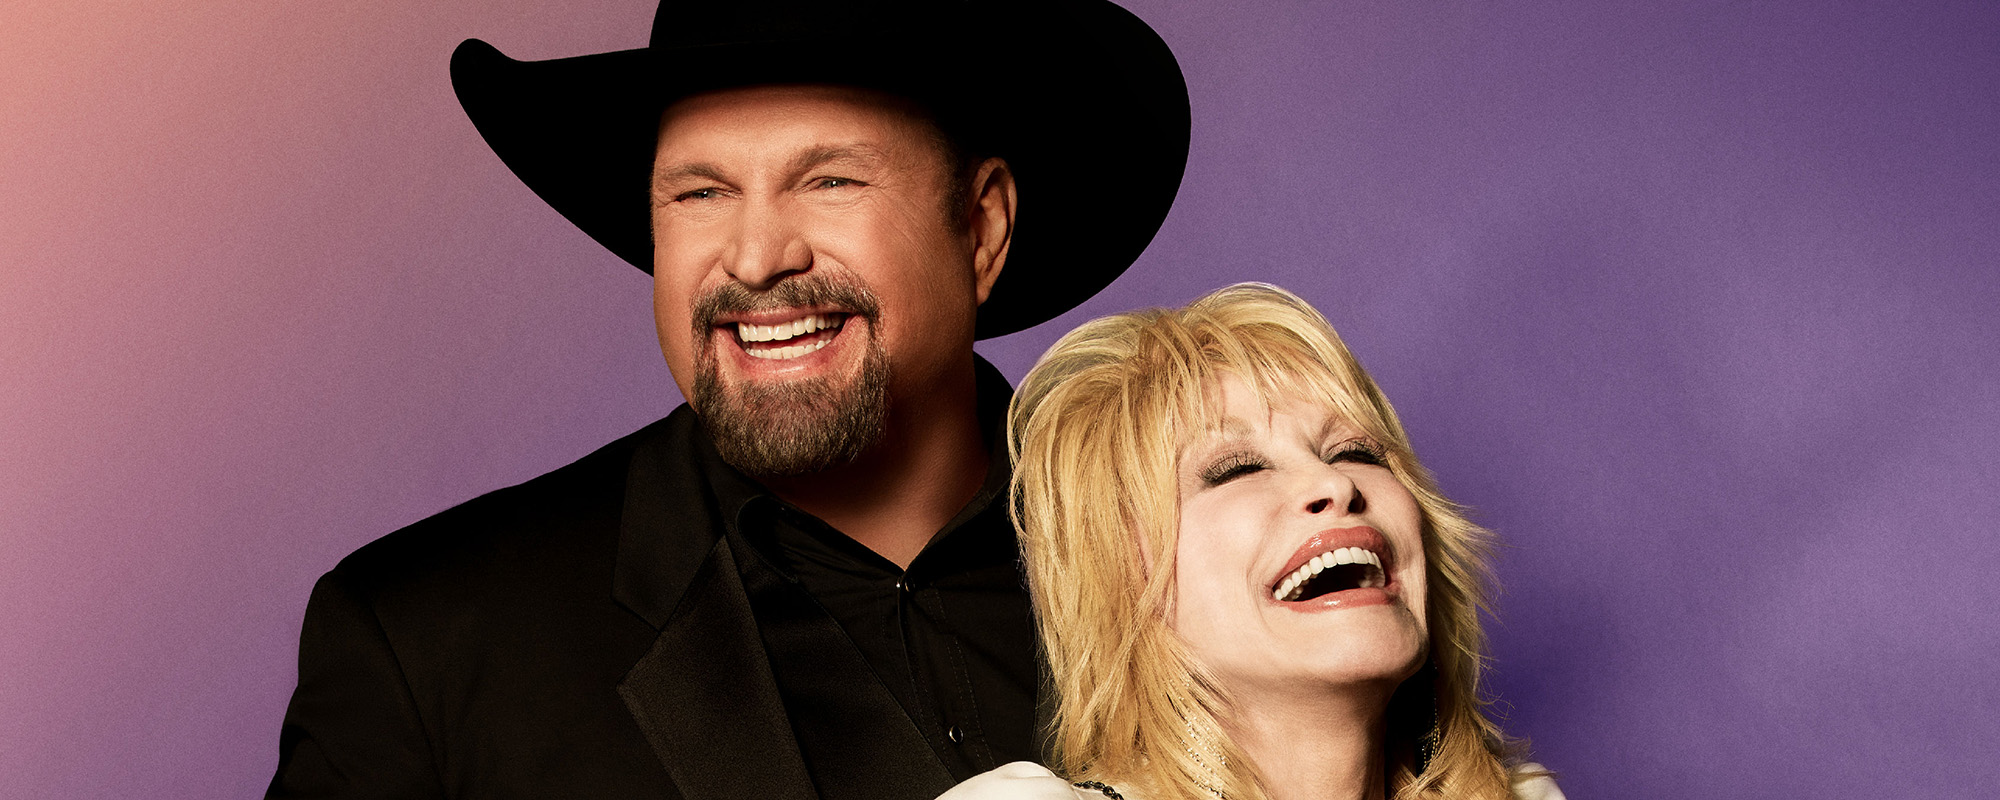 Dolly Parton and Garth Brooks Co-Hosting 2023 ACM Awards